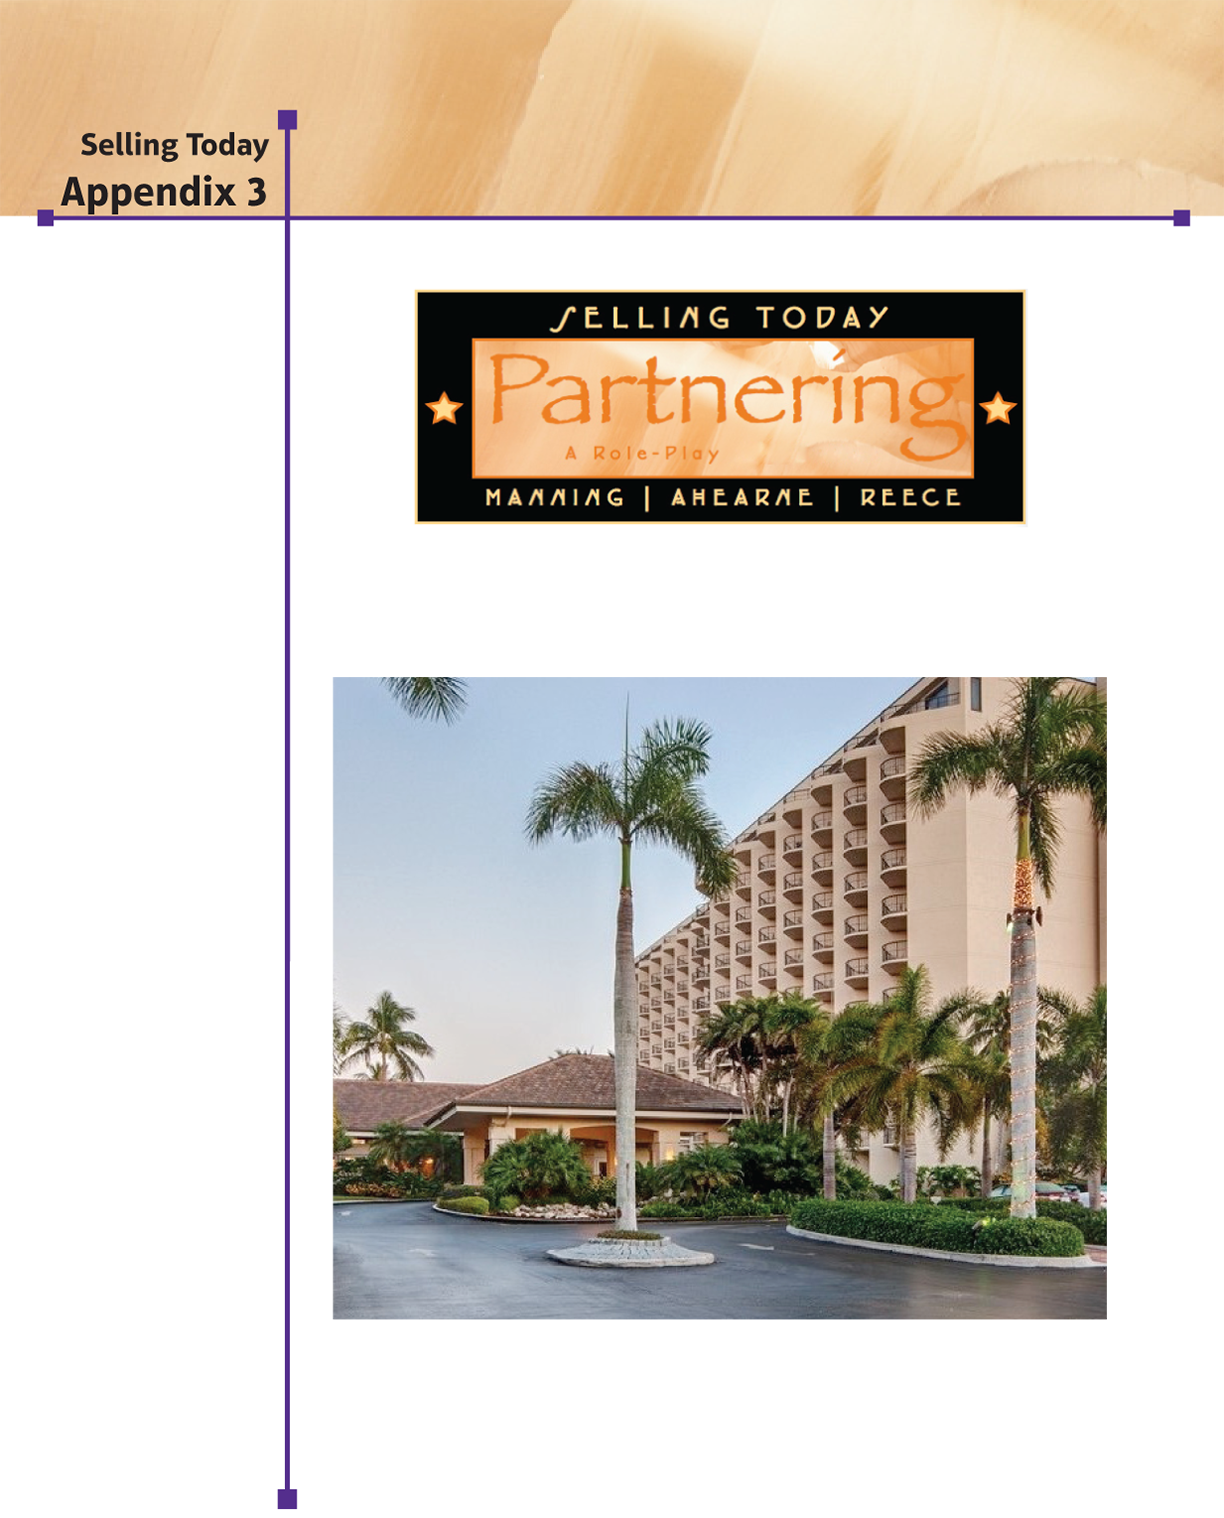 The intro page of appendix 3(selling today) shows a banner reading “Selling today; Partnering (a role play); Manning, Ahearne, Reece” and a photo of a beach resort.